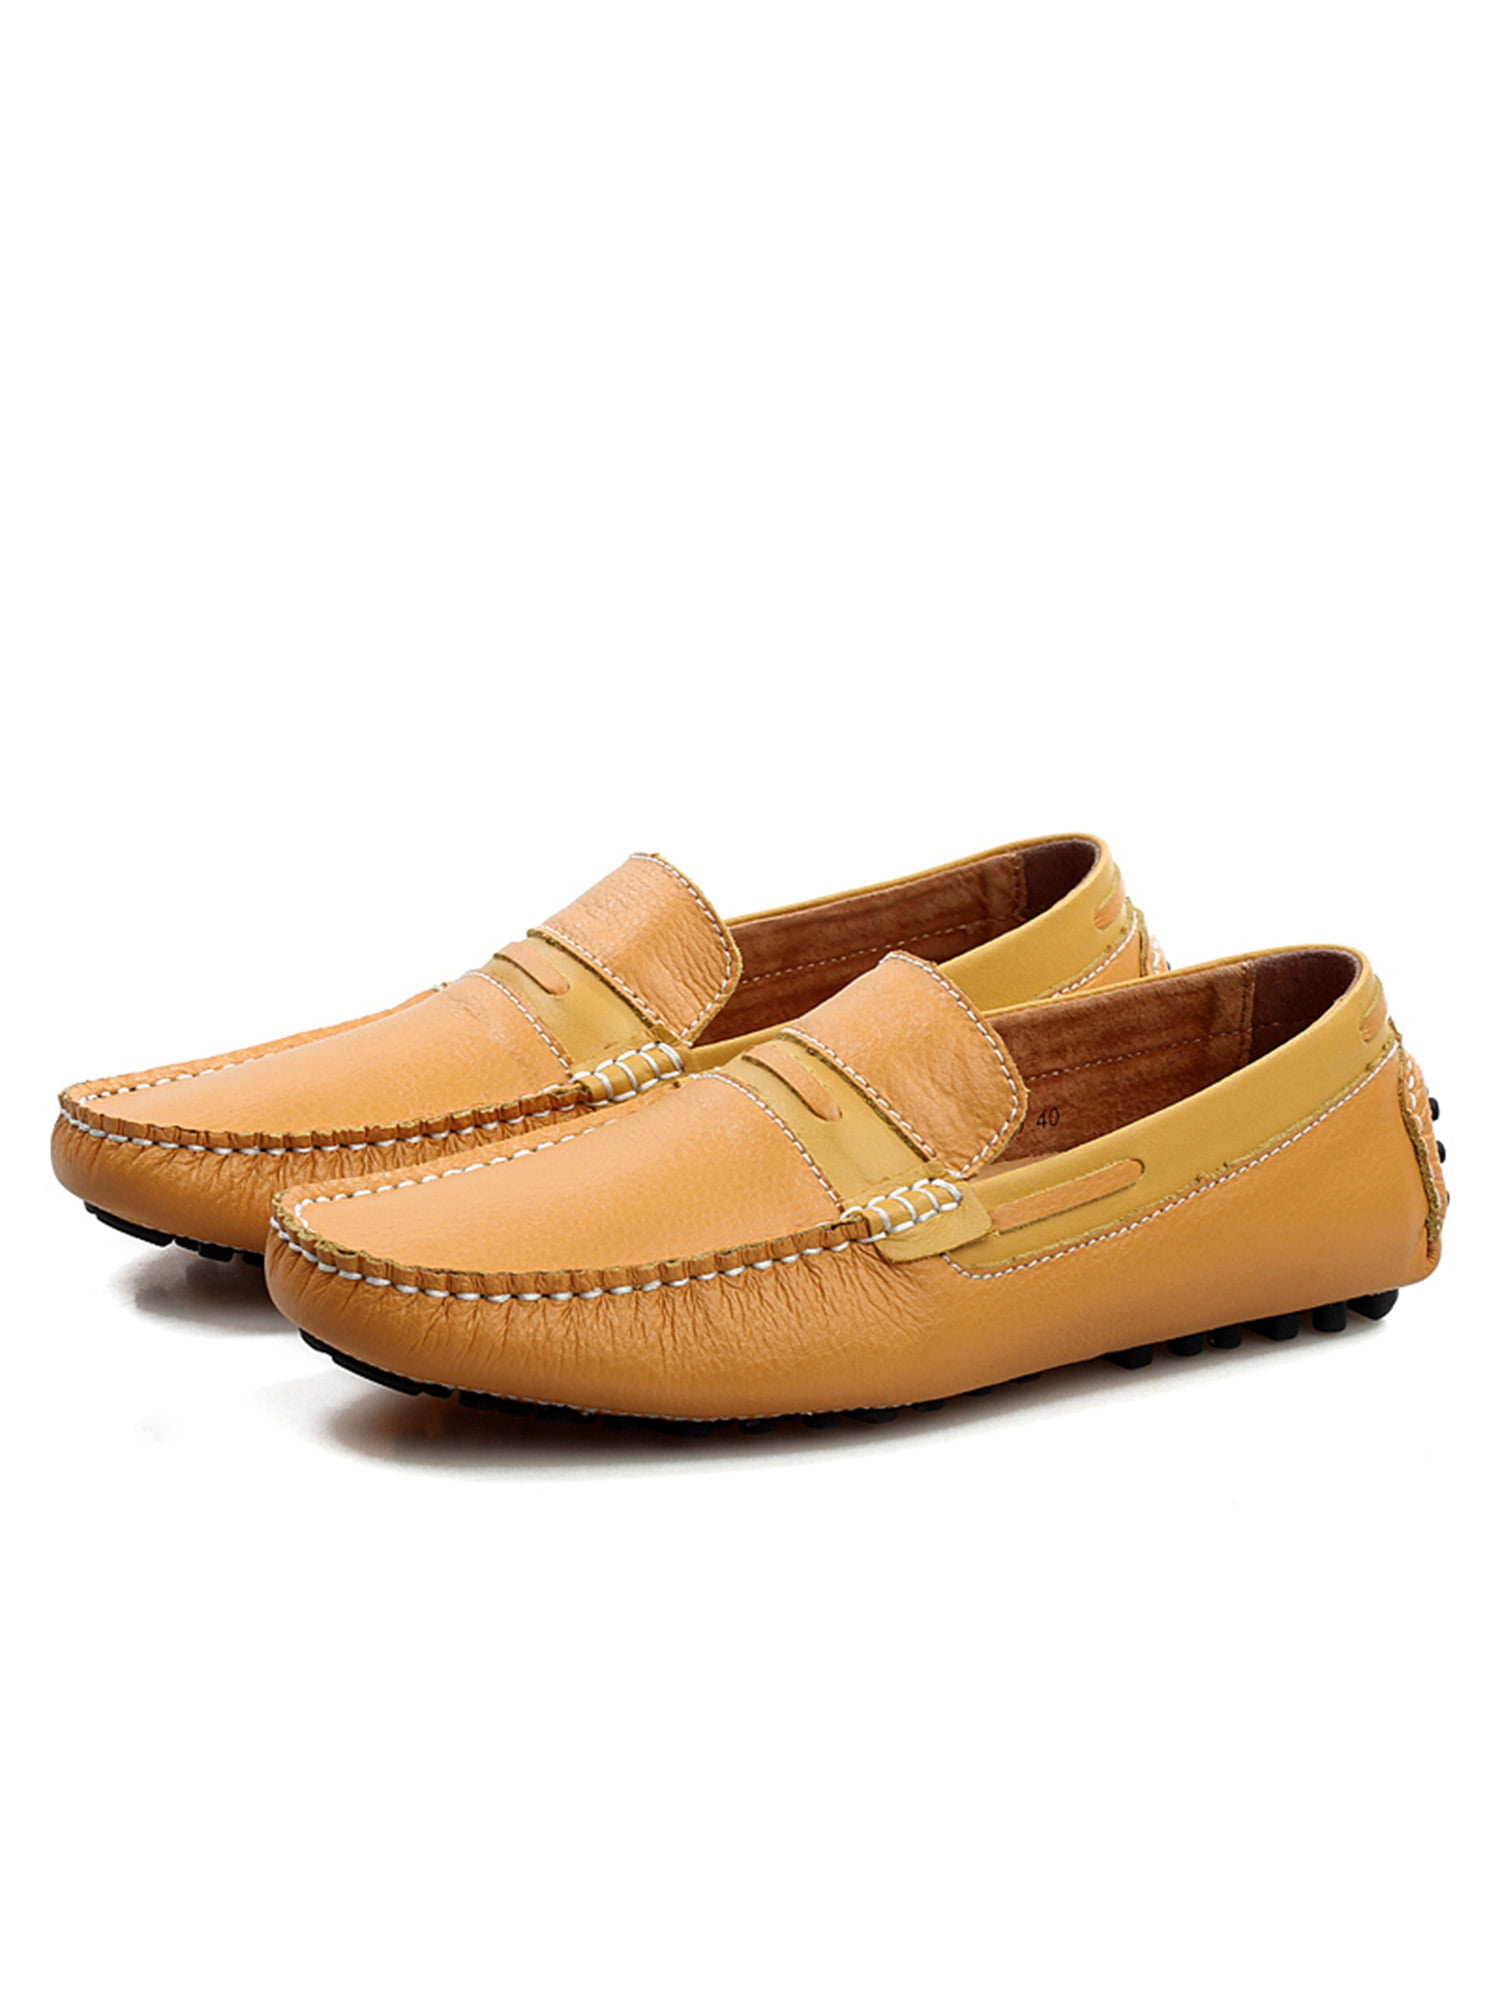 Men Casual Driving Loafers Slip On Boat Shoes Lightweight Leather Flat Moccasins 